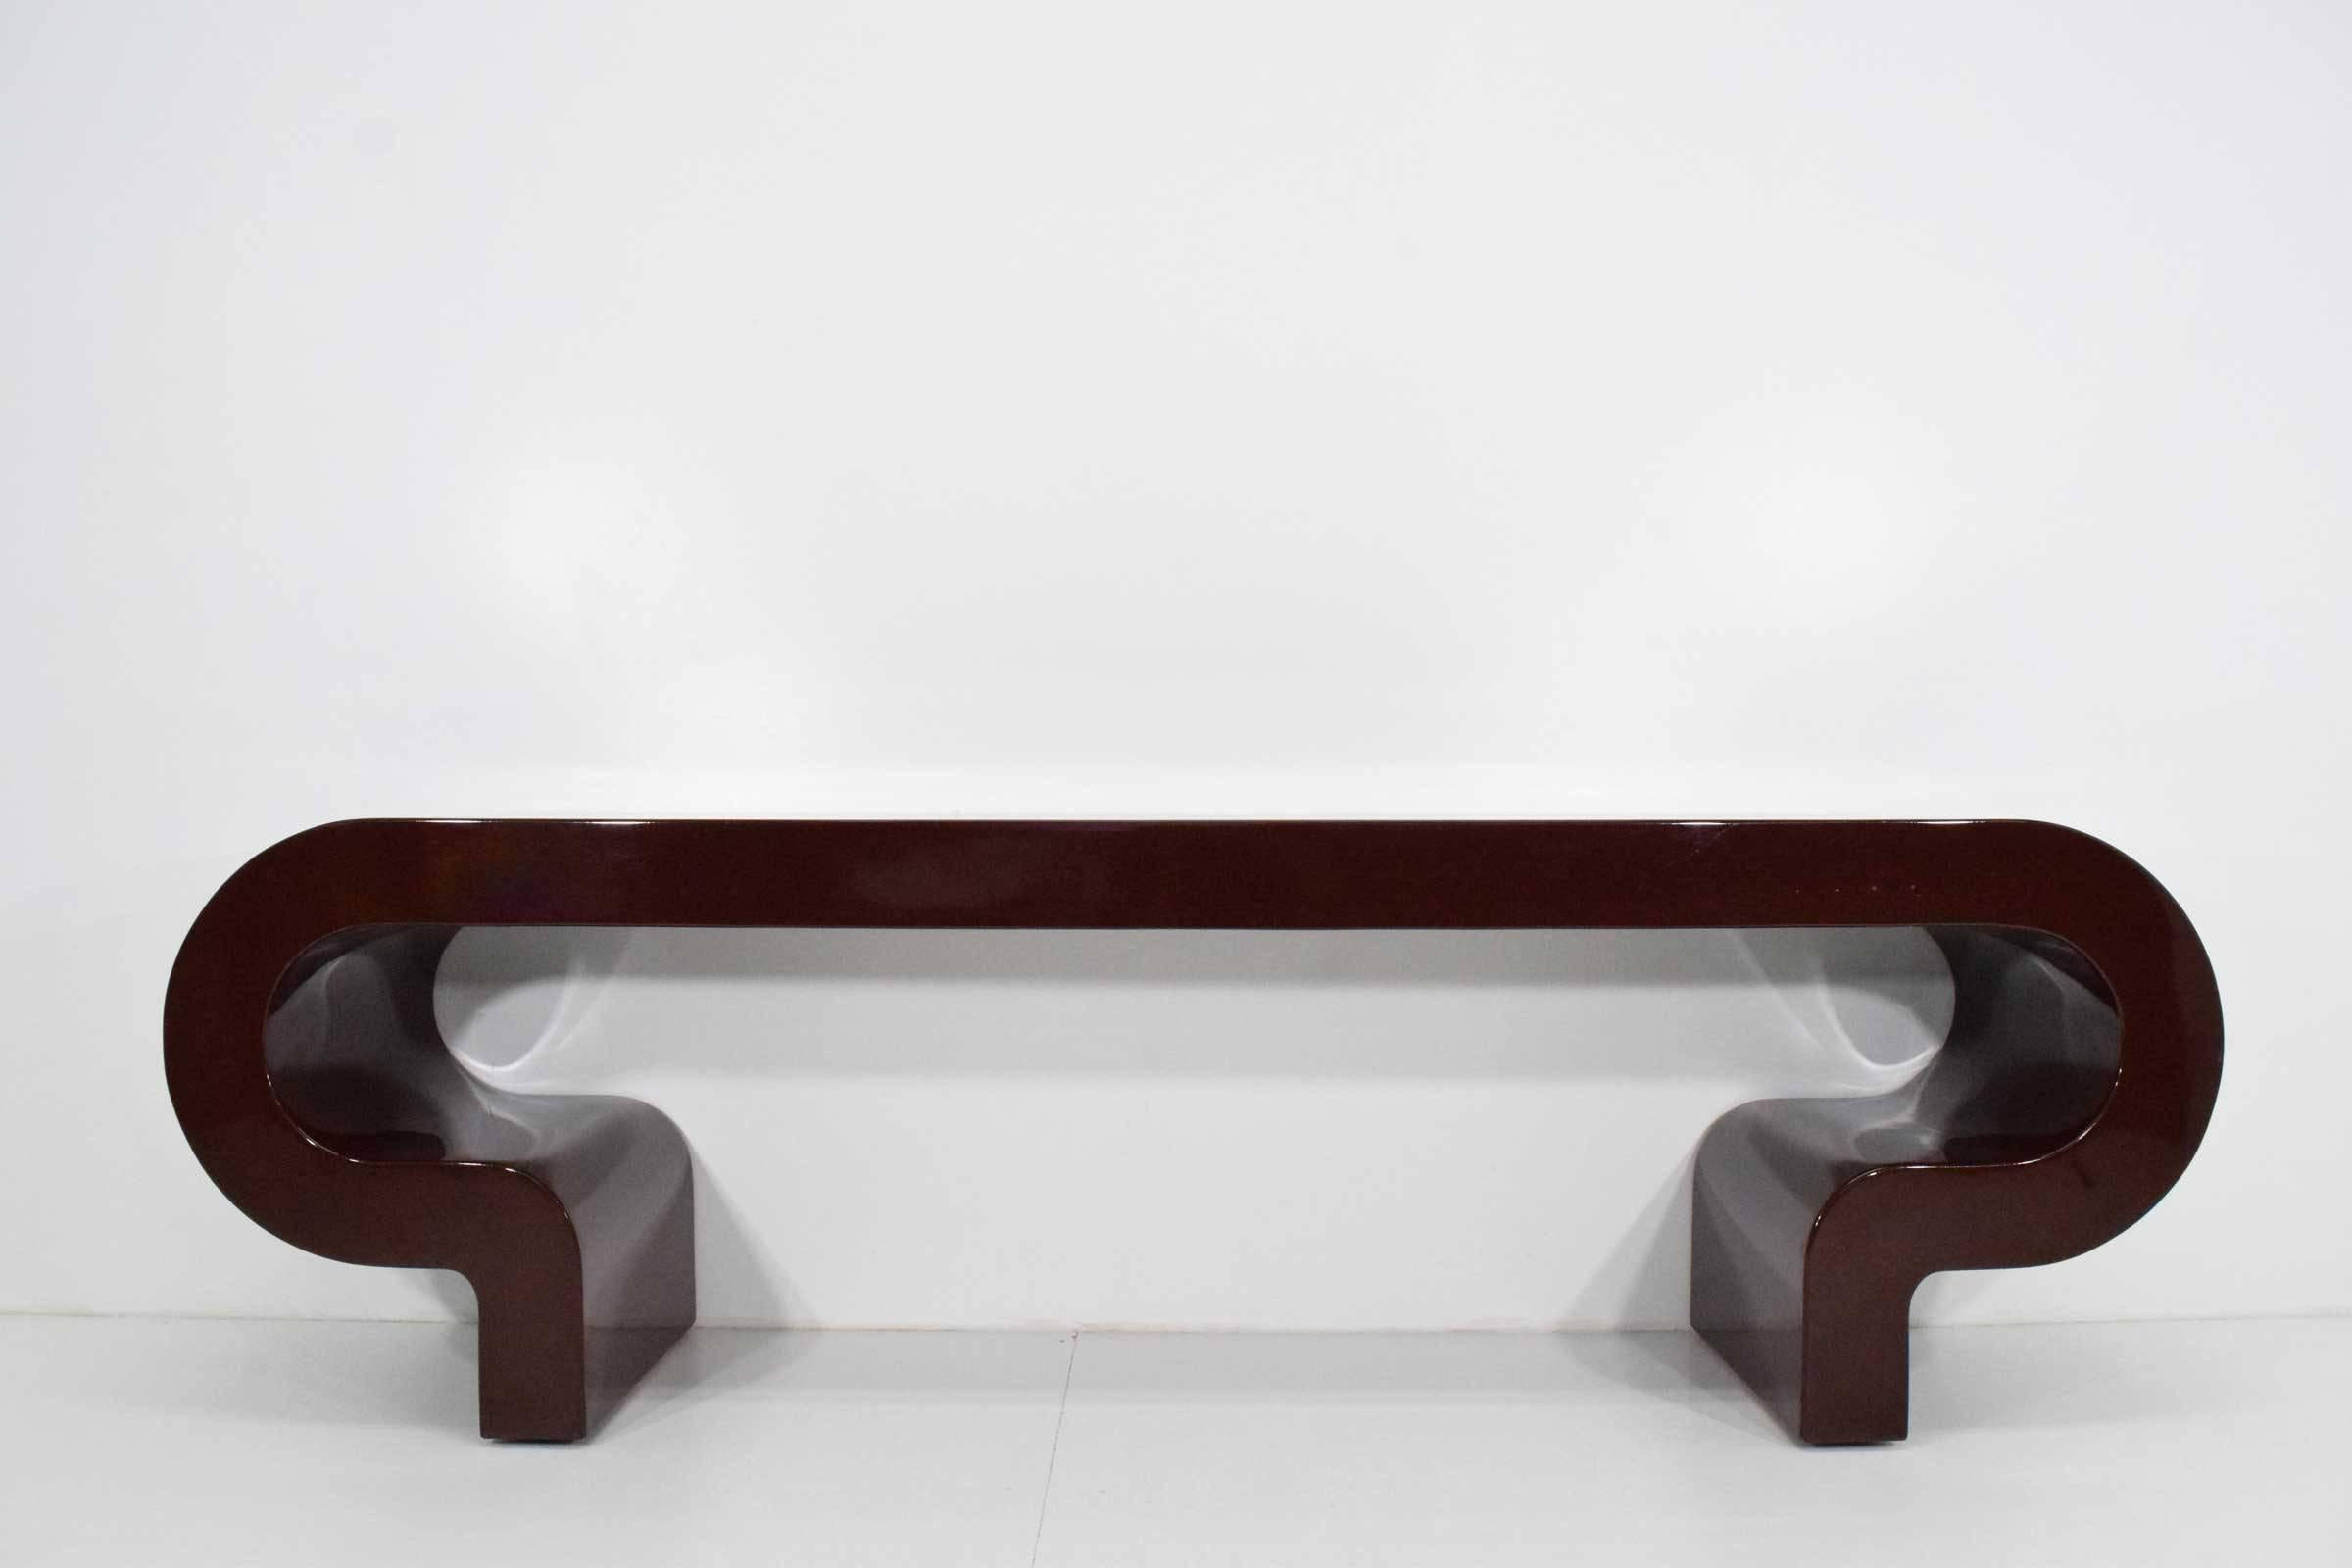 Beautifully simple, substantially constructed. Great looking console for entry, dining, or any room. This can also be a great desk. We recommend re-lacquering which we can help with if desired. 